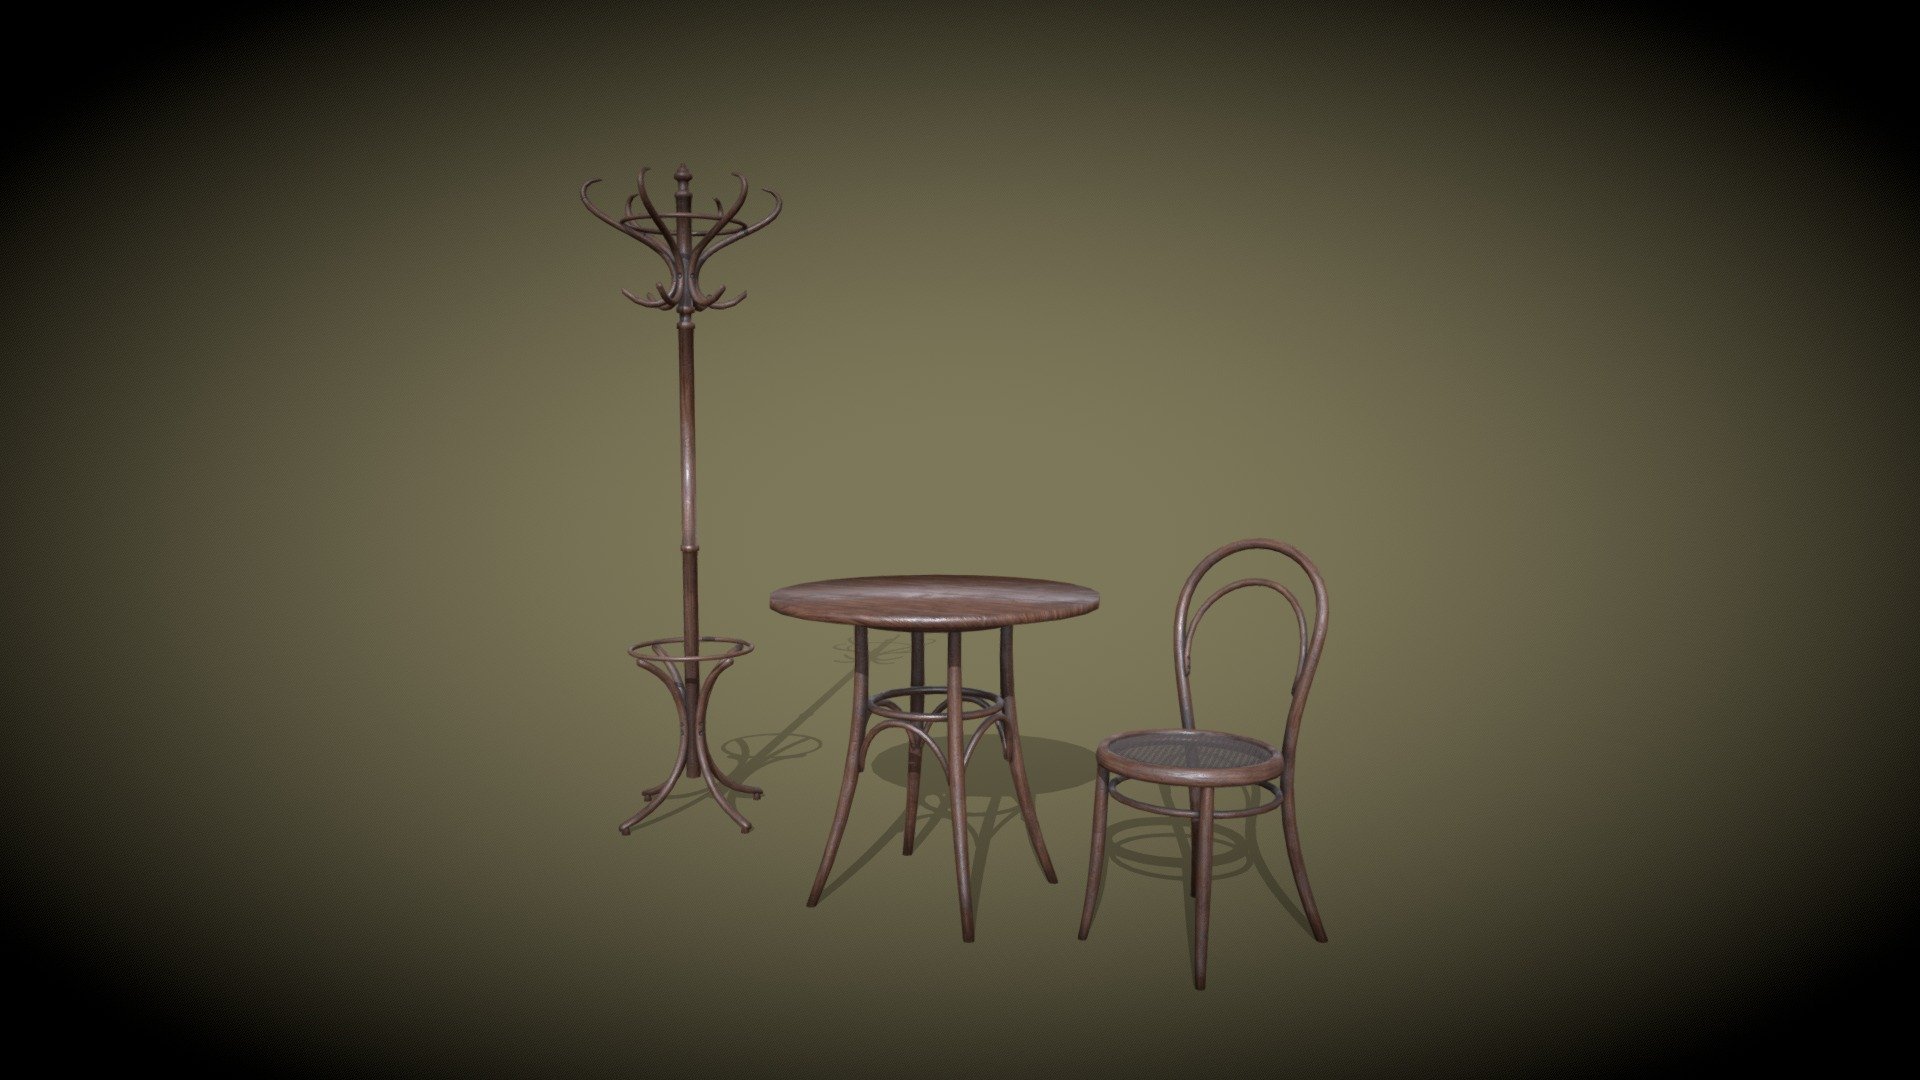 Chair - Michael Thonet Nr.14 (from 1860). Table - Gebrüder Thonet GmbH (2nd half of the 19th century). Coat stand - Michael Thonet Nr.15 (middle of the 19th century).

Low poly - less than 5000 quads for all.

Blender, Substance Painter 3d model